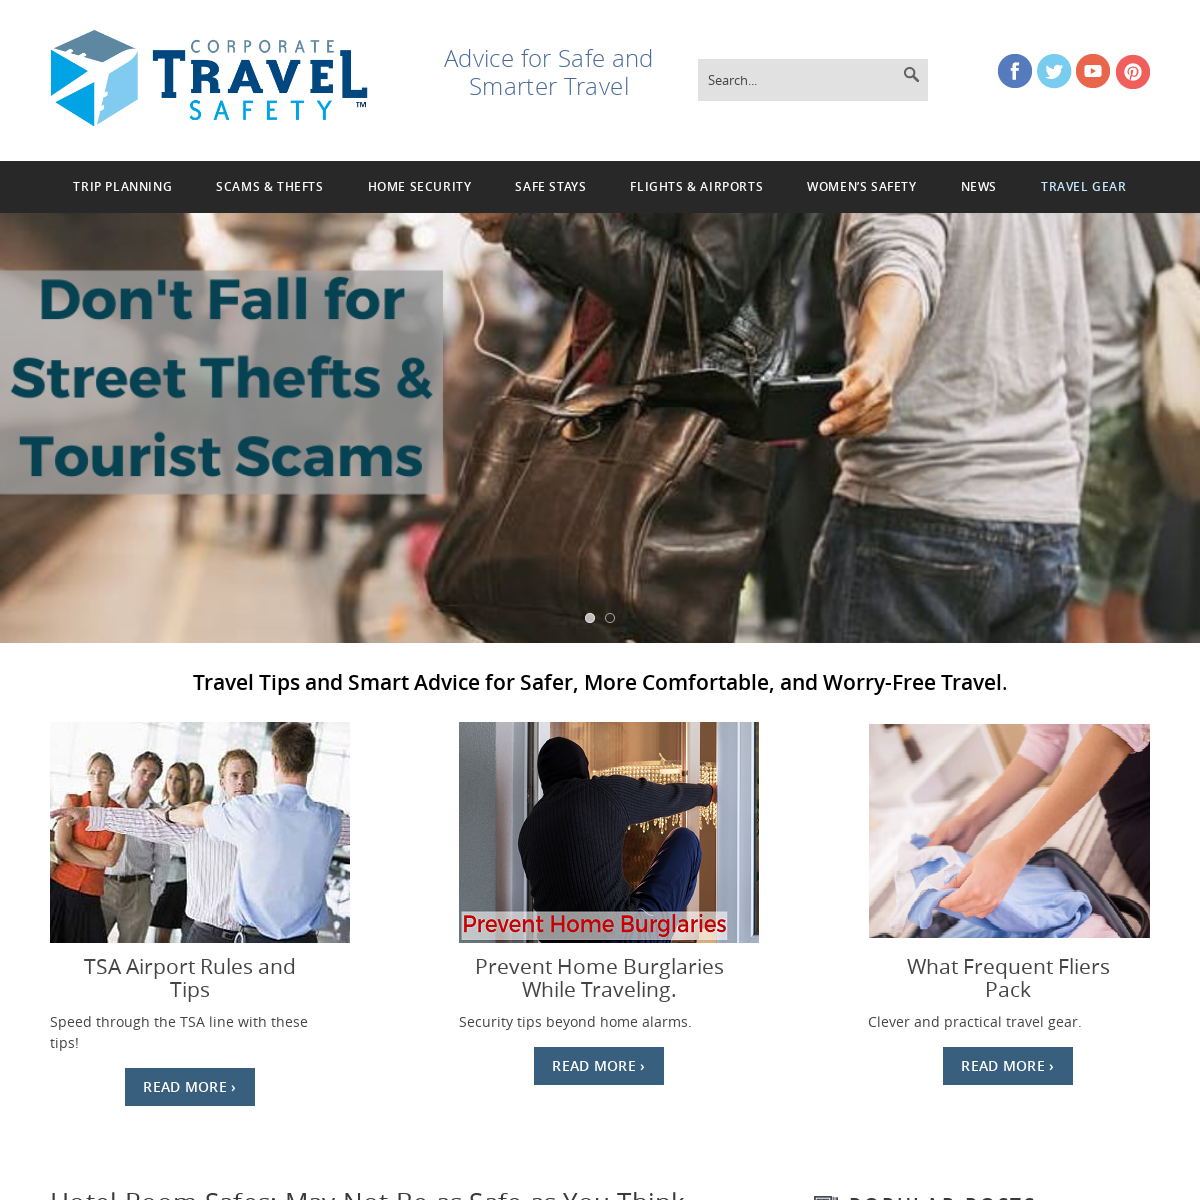 A complete backup of corporatetravelsafety.com